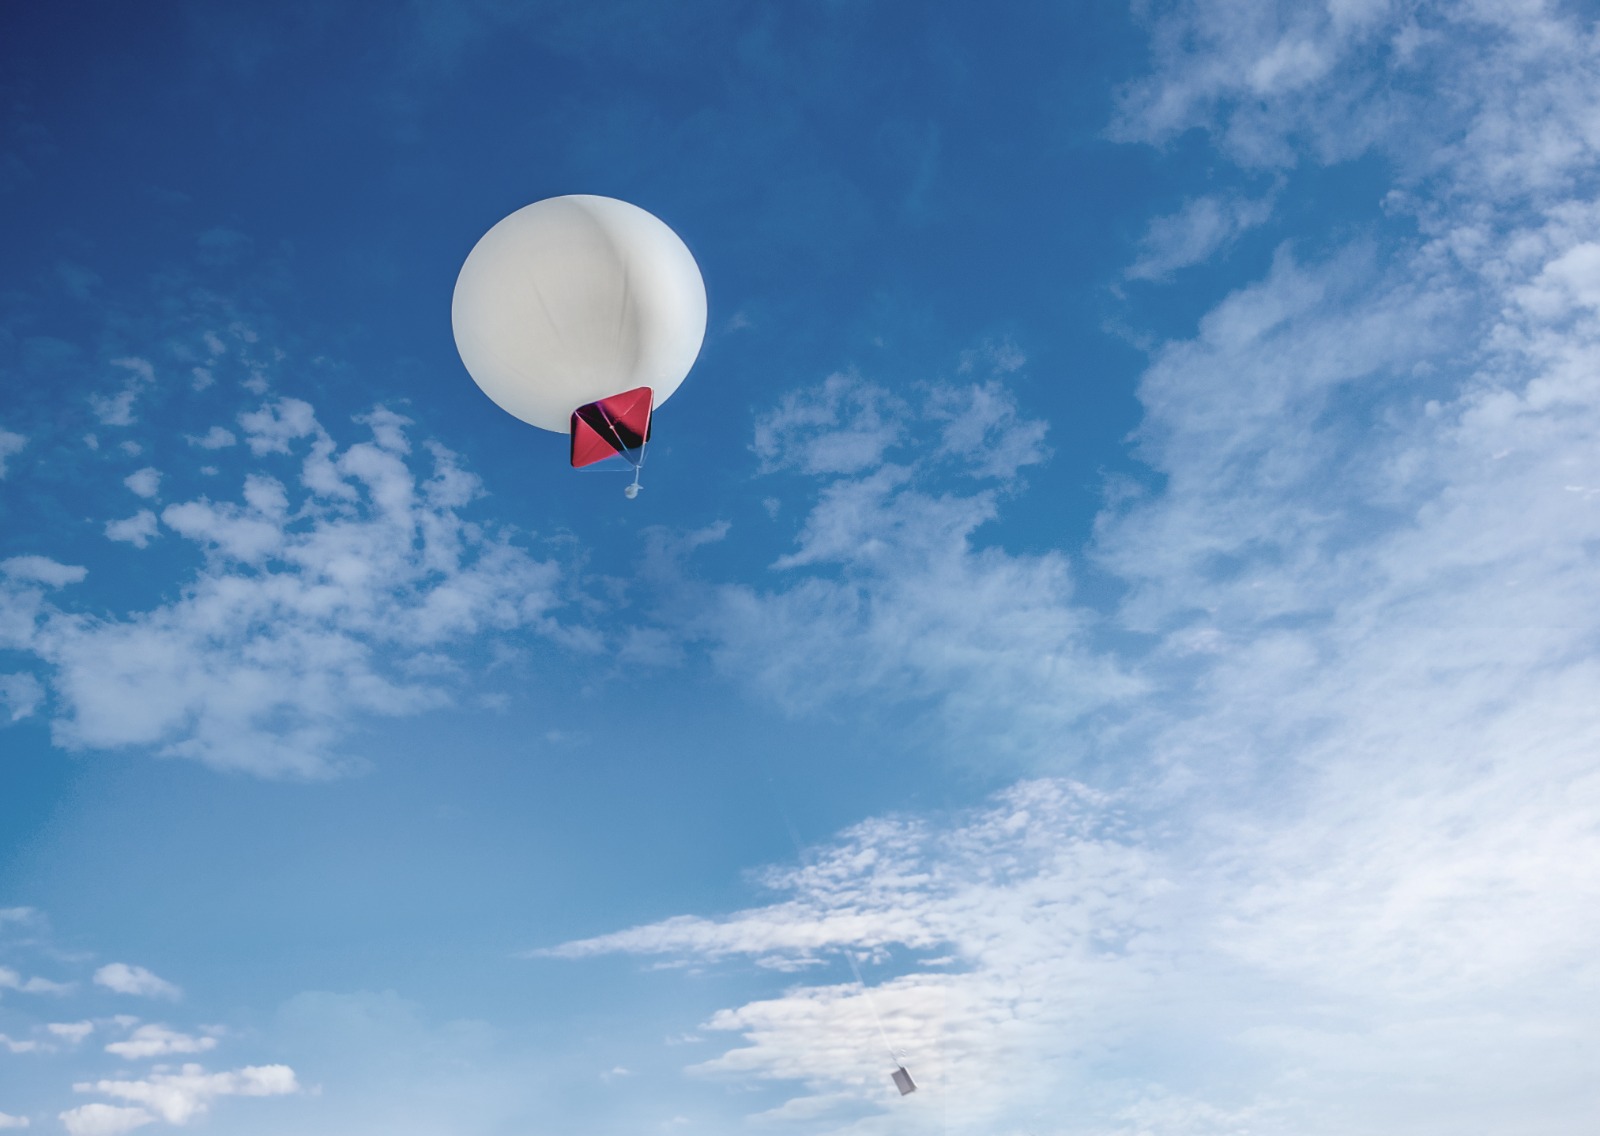 High Hopes plans to extract atmospheric CO2 with hot air balloons